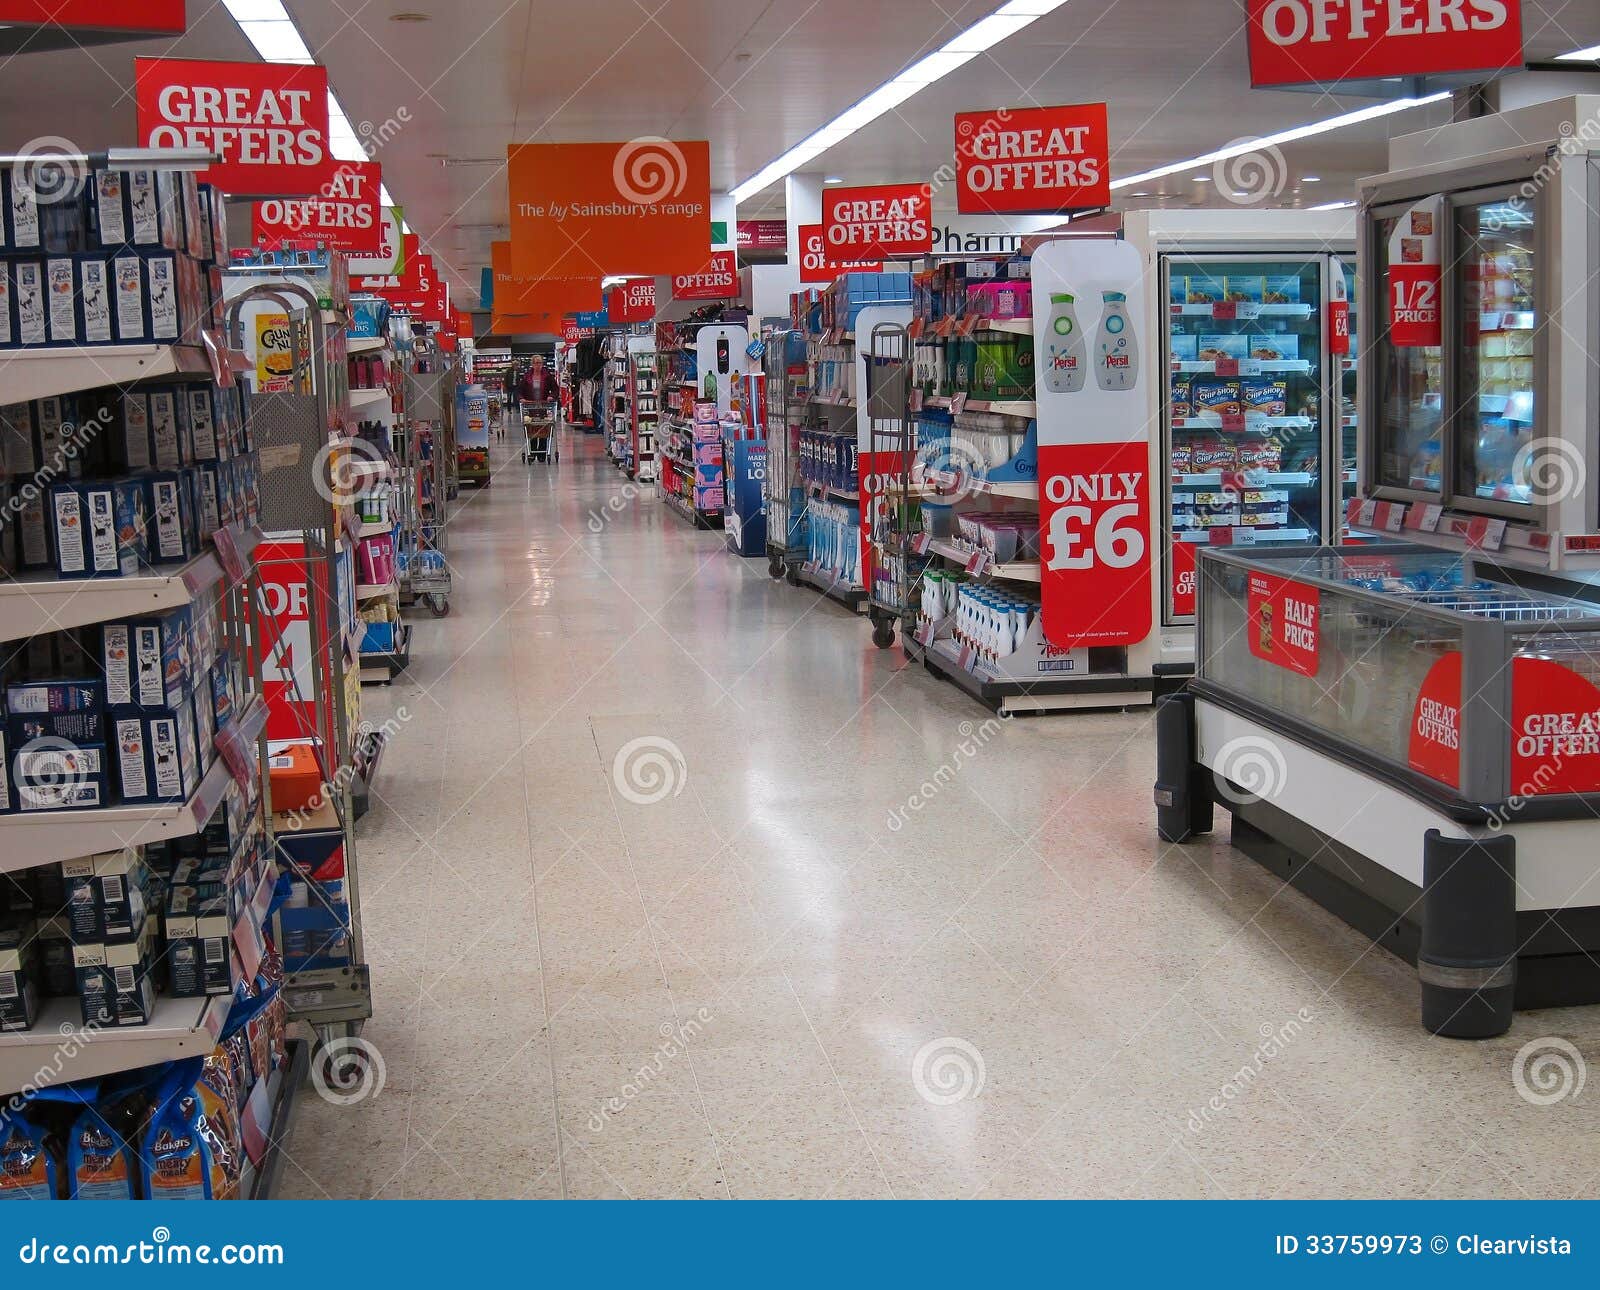 Center aisle in a food superstore. The center aisle in a large supermarket with all the various aisles going off in either direction. many signs for great offers displayed. This is in the Sainsbury supermarket at Bedford, England, United Kingdom.